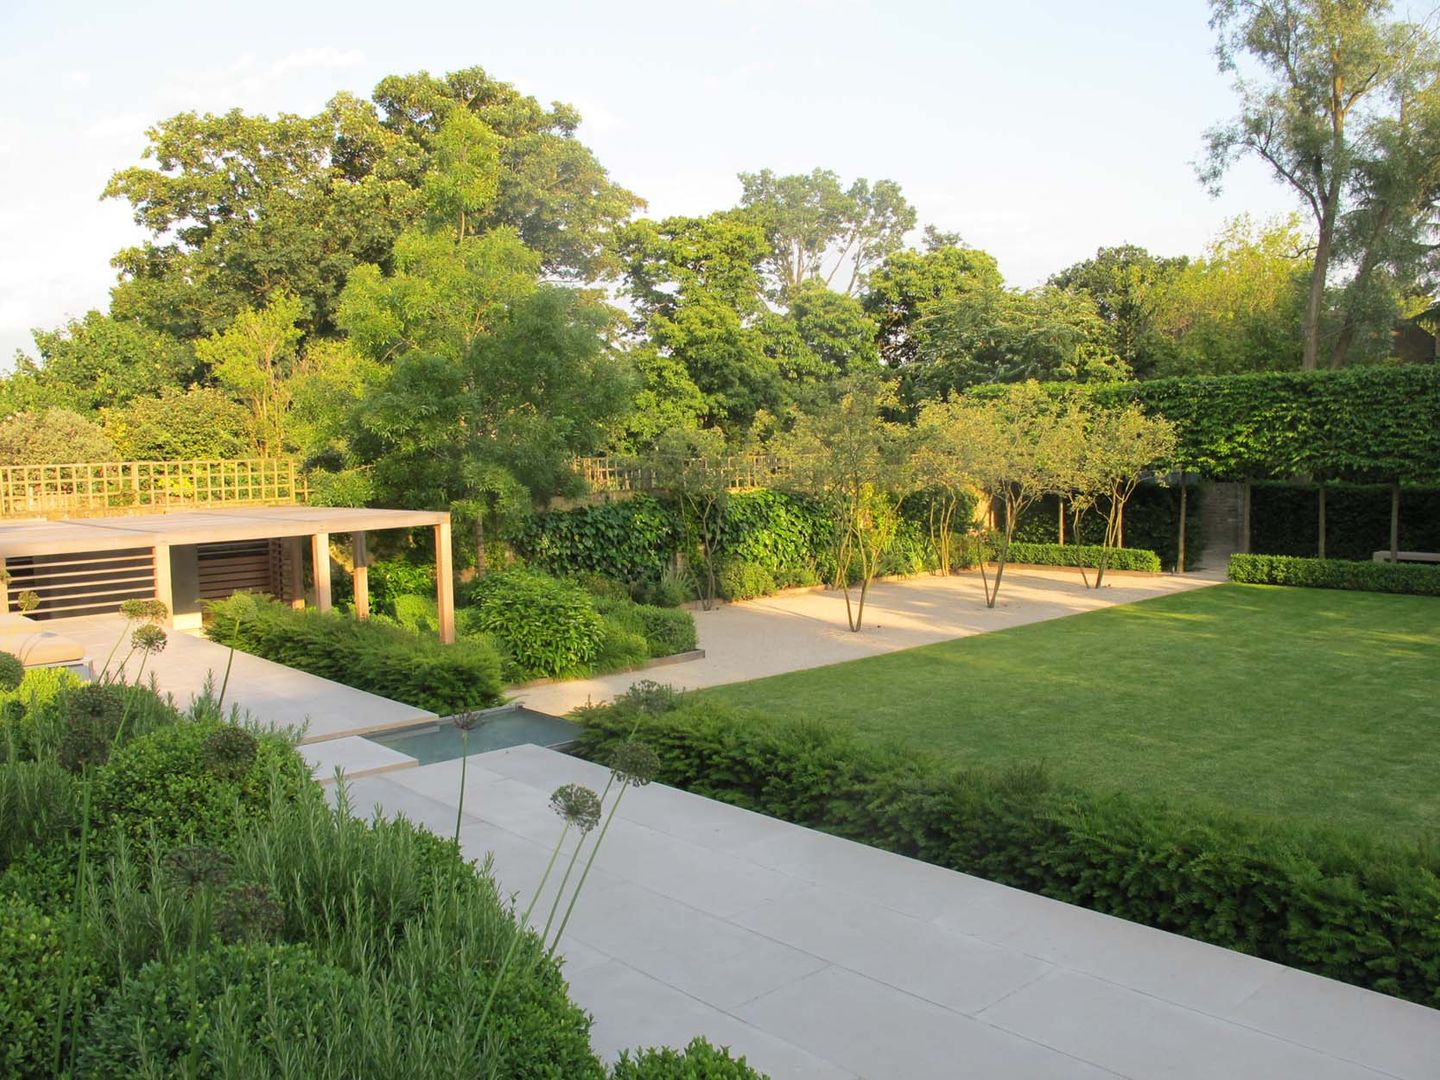 Formal Structural Garden - view across terrace to lower lawn homify Vườn phong cách hiện đại Charlotte Rowe,contemporary,urban,layered hedging,pétanque court,fireplace,London garden,levels,water rill,limestone paving,terrace,lawn